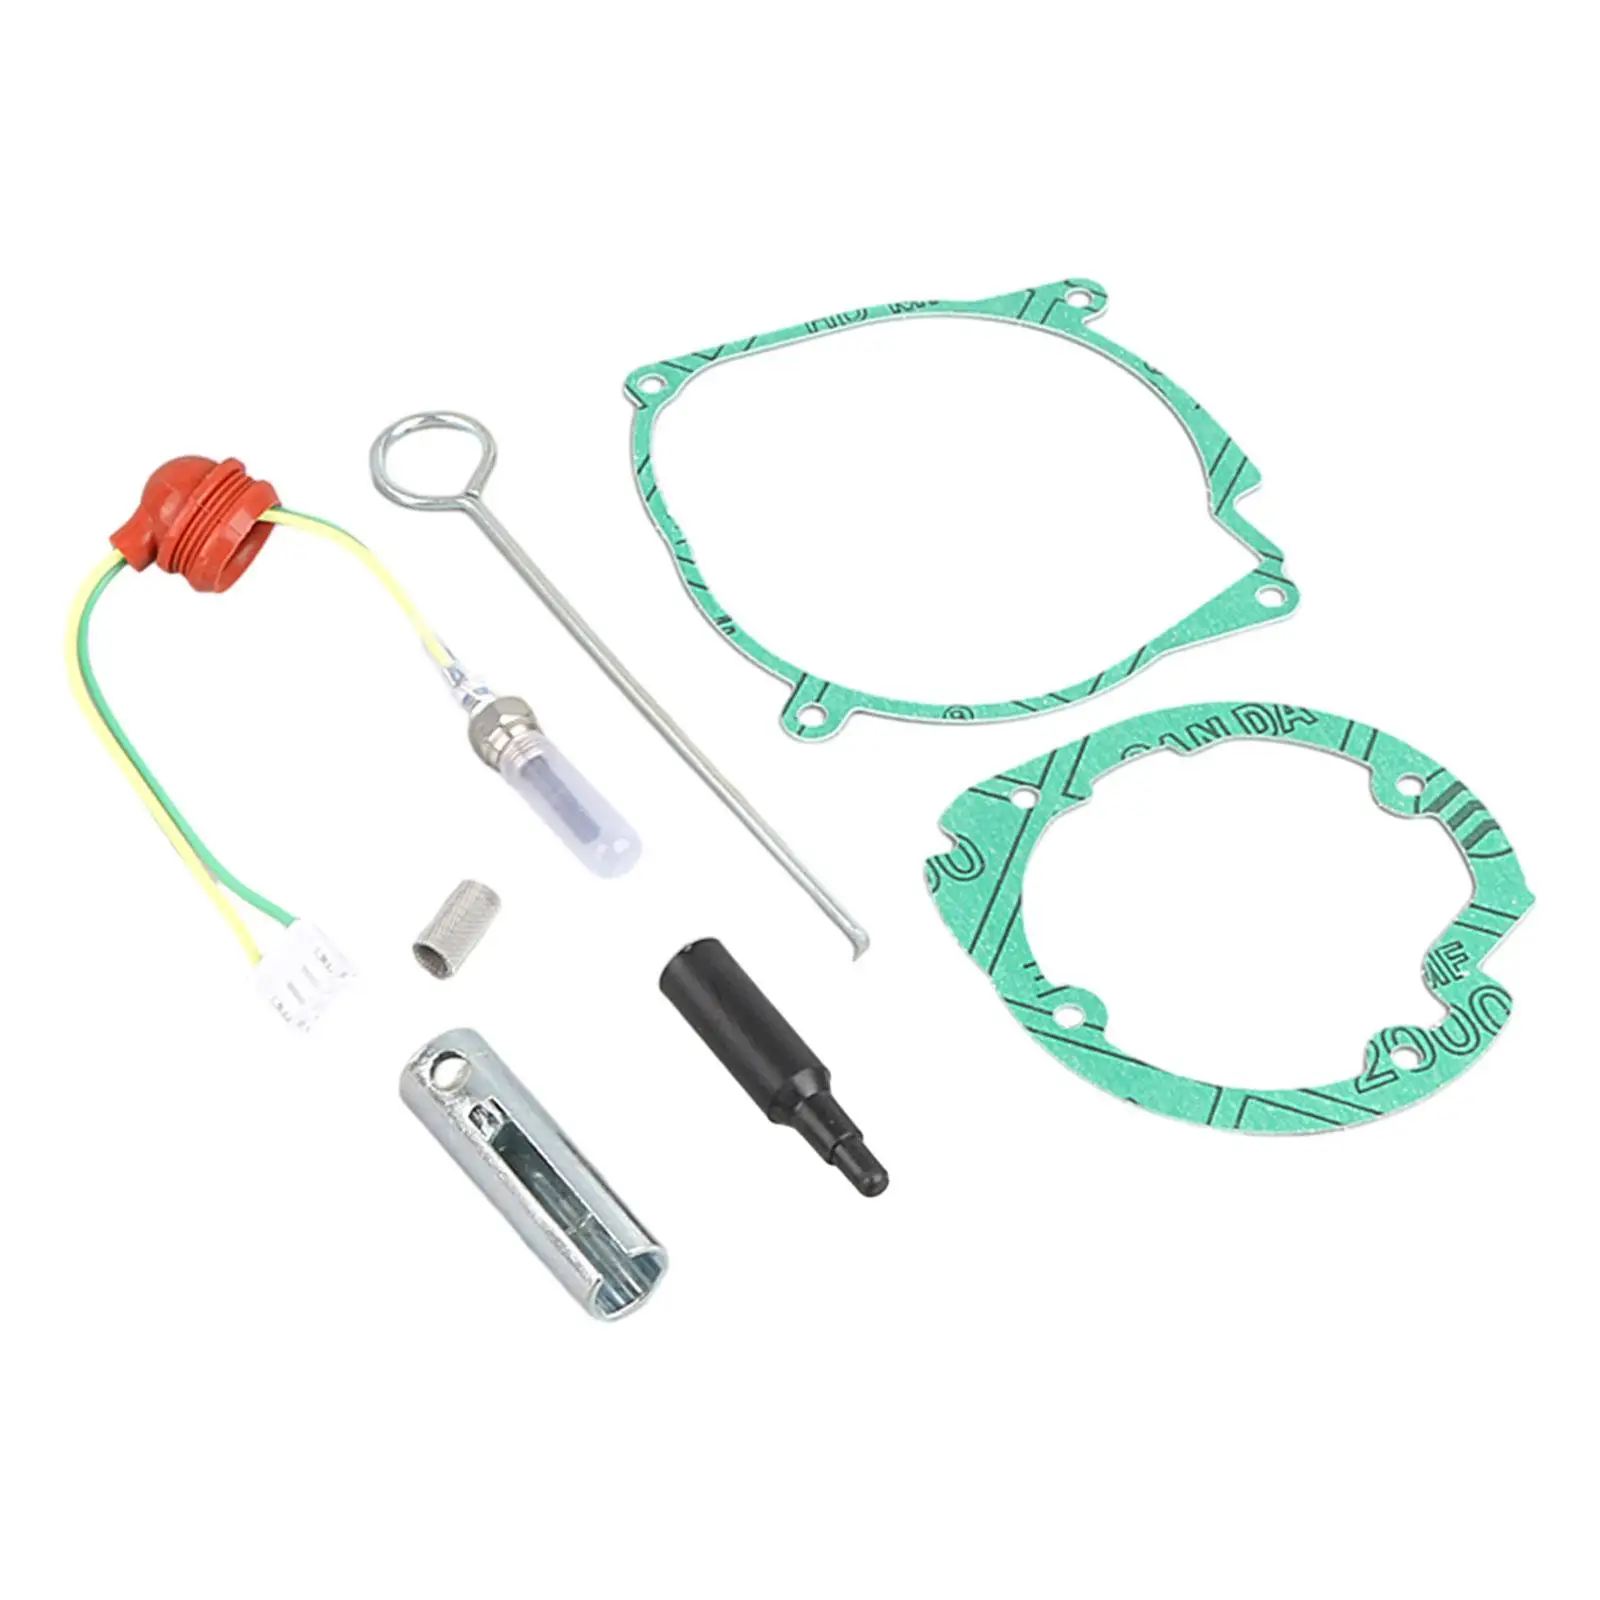 Glow Plug Repair Kit Accessories Parts Replacement Net Sturdy Seal Repair Parts for 12V 5kW Parking Heater Truck Boat Truck